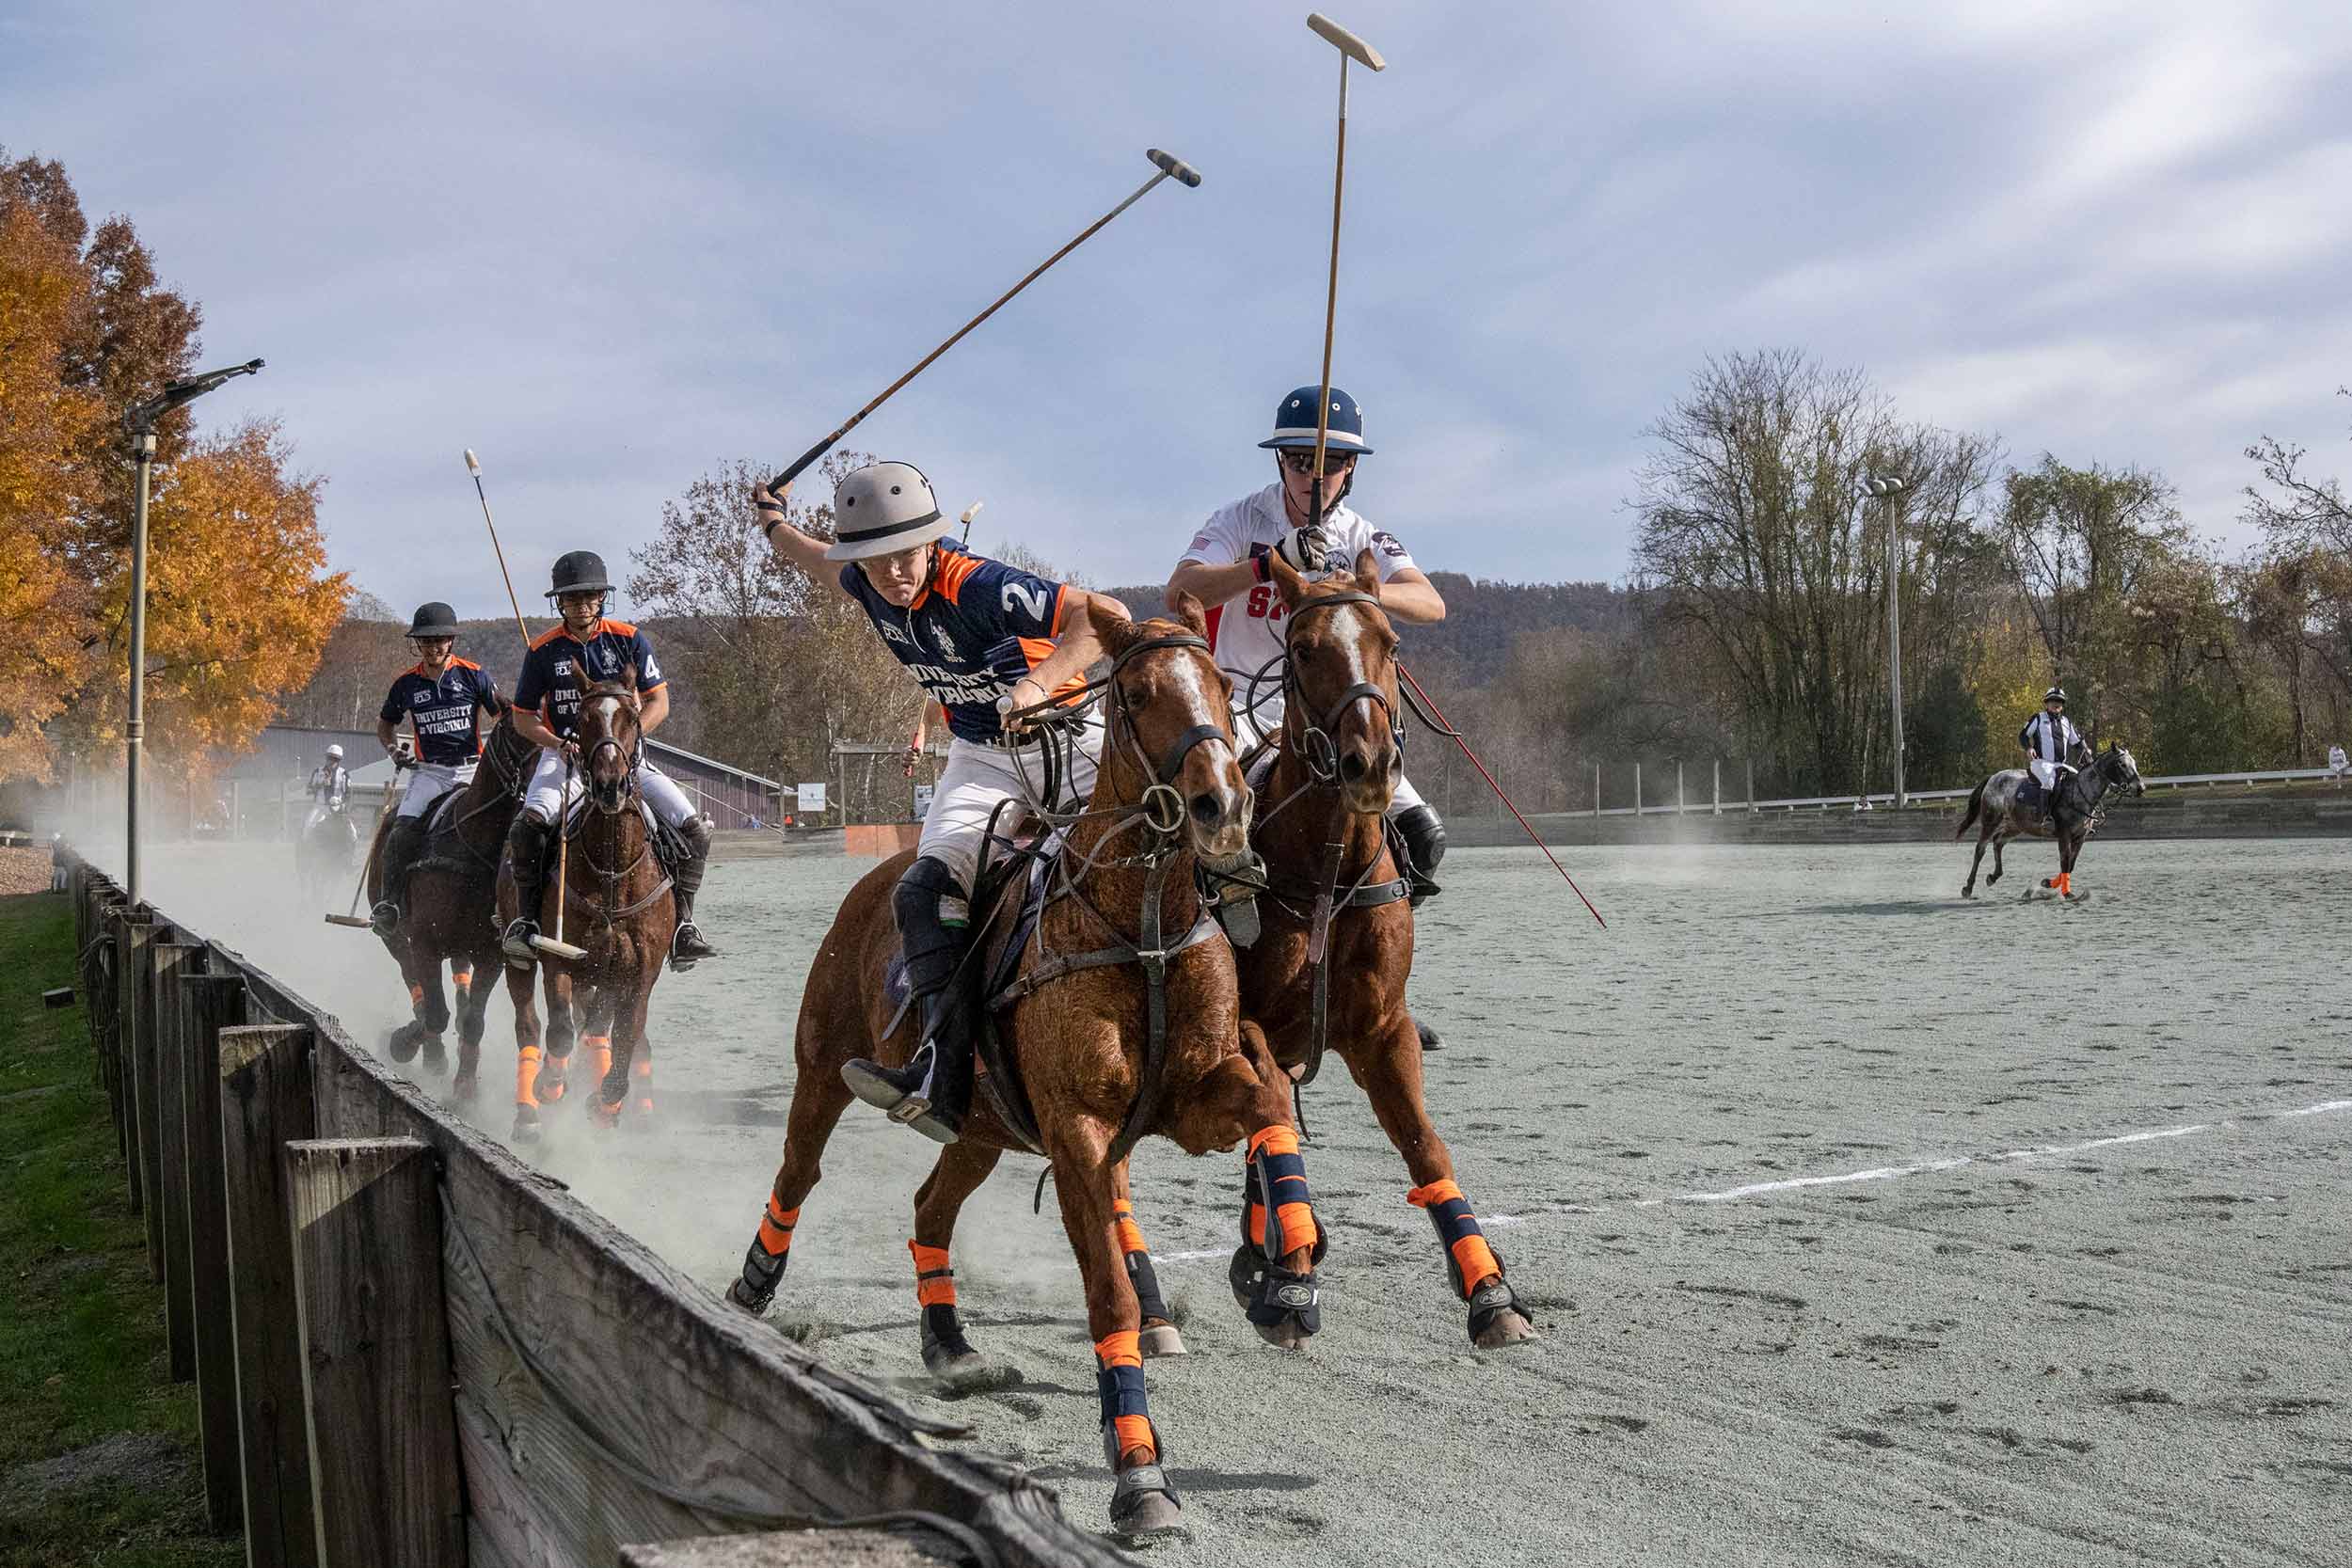 UVA polo player during a matching swinging to hit the ball